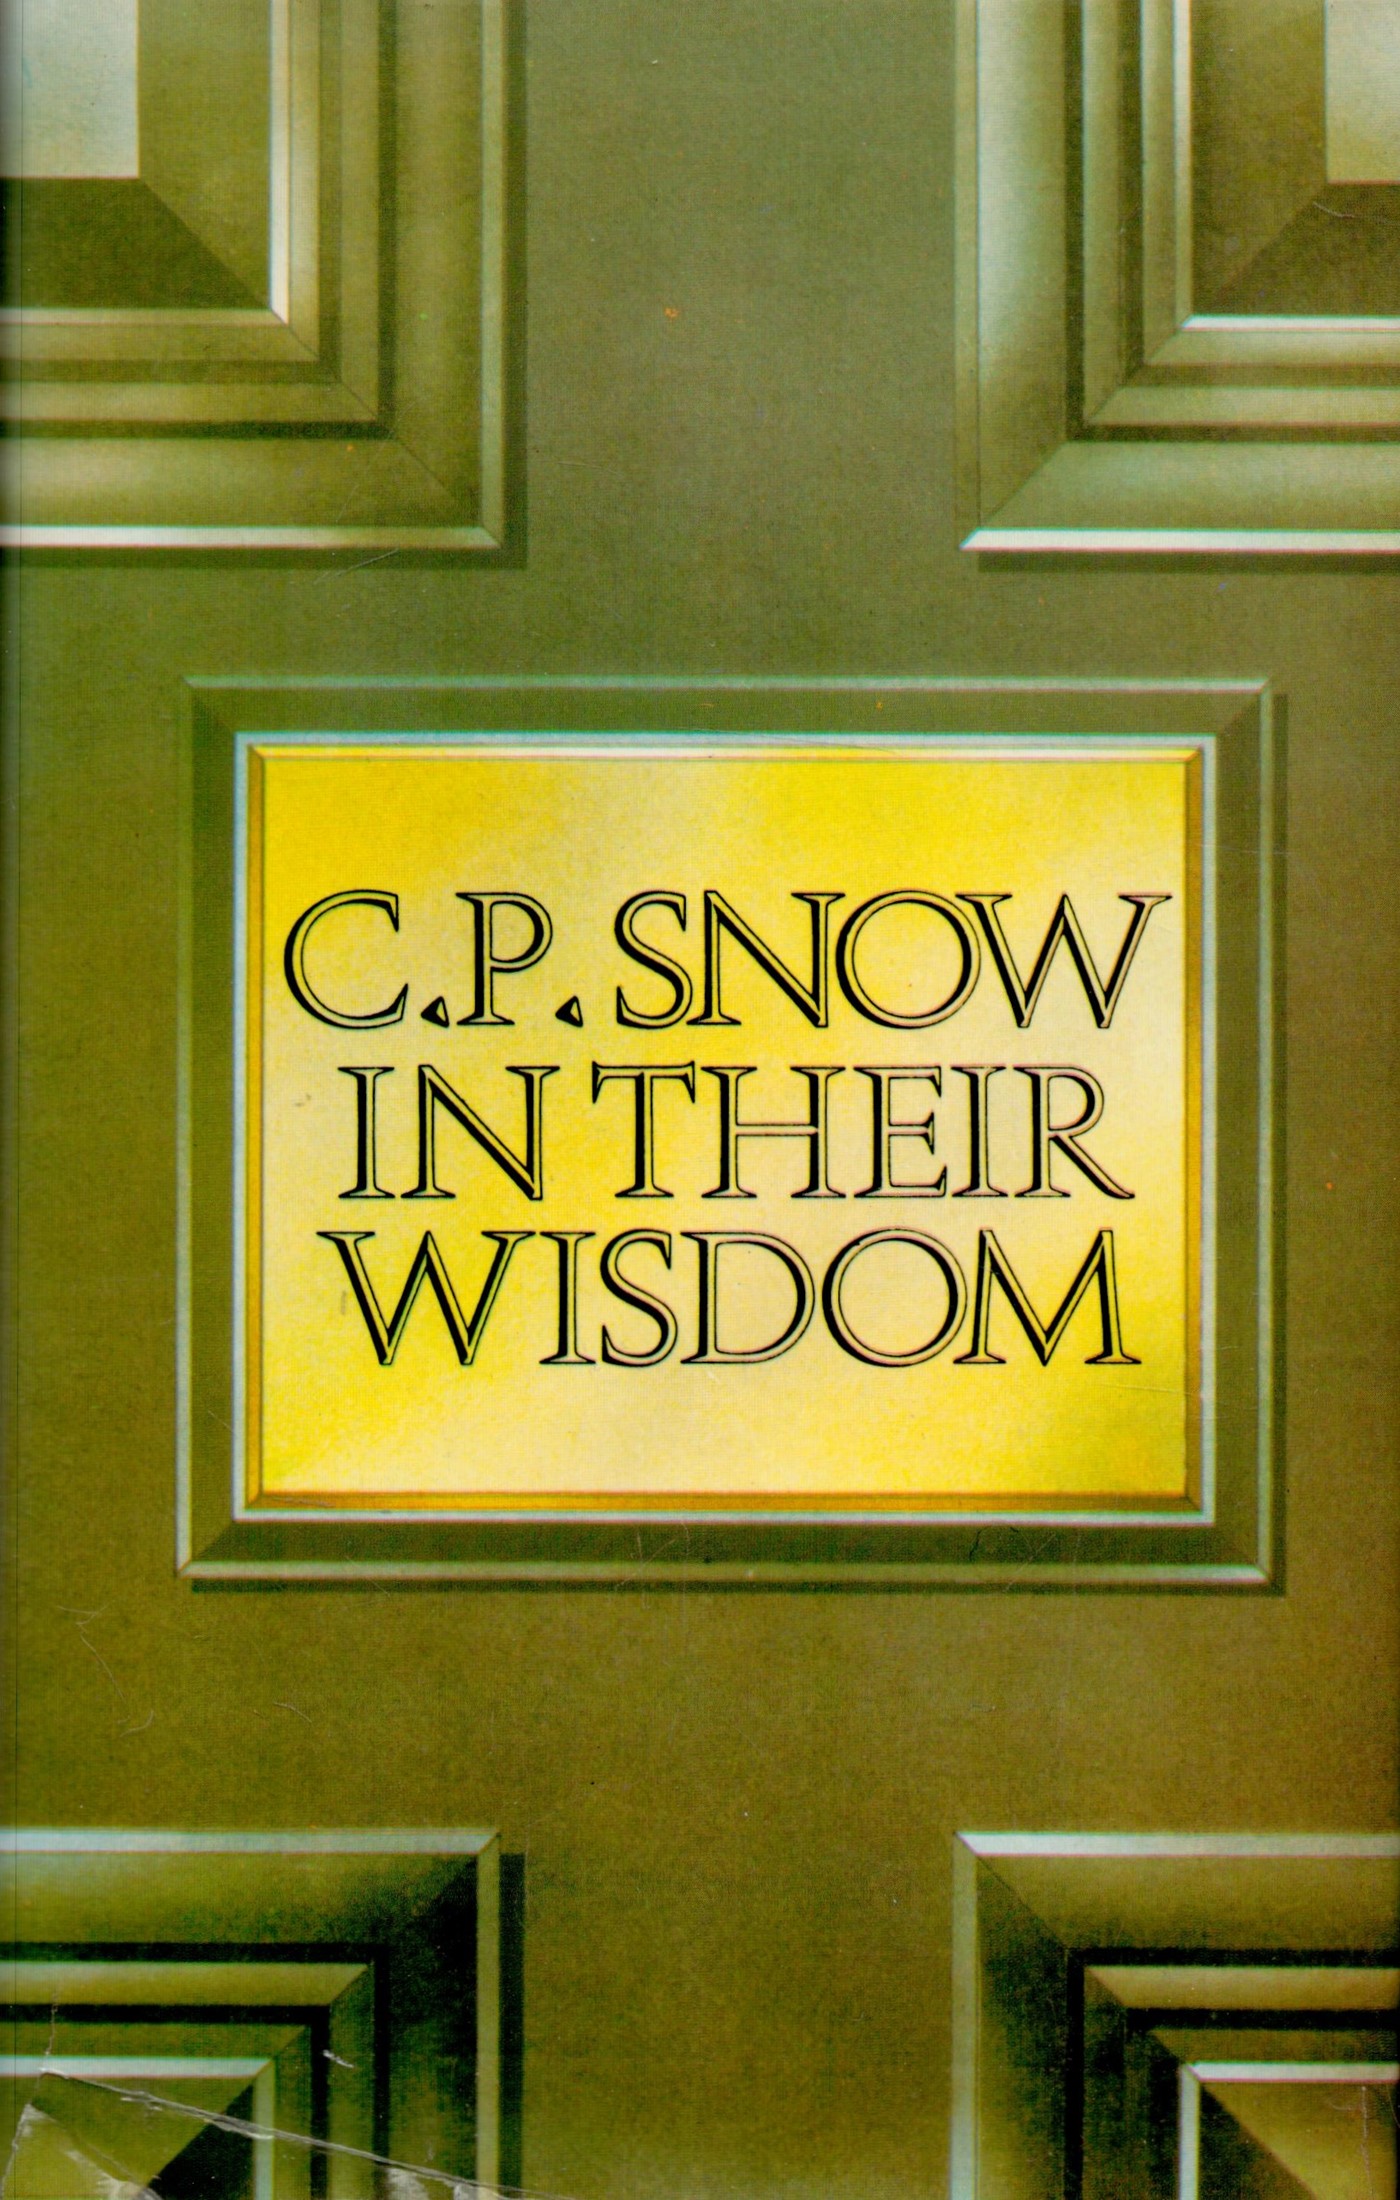 In Their Wisdom by C P Snow Hardback Book 1974 First Edition published by Macmillan London Ltd